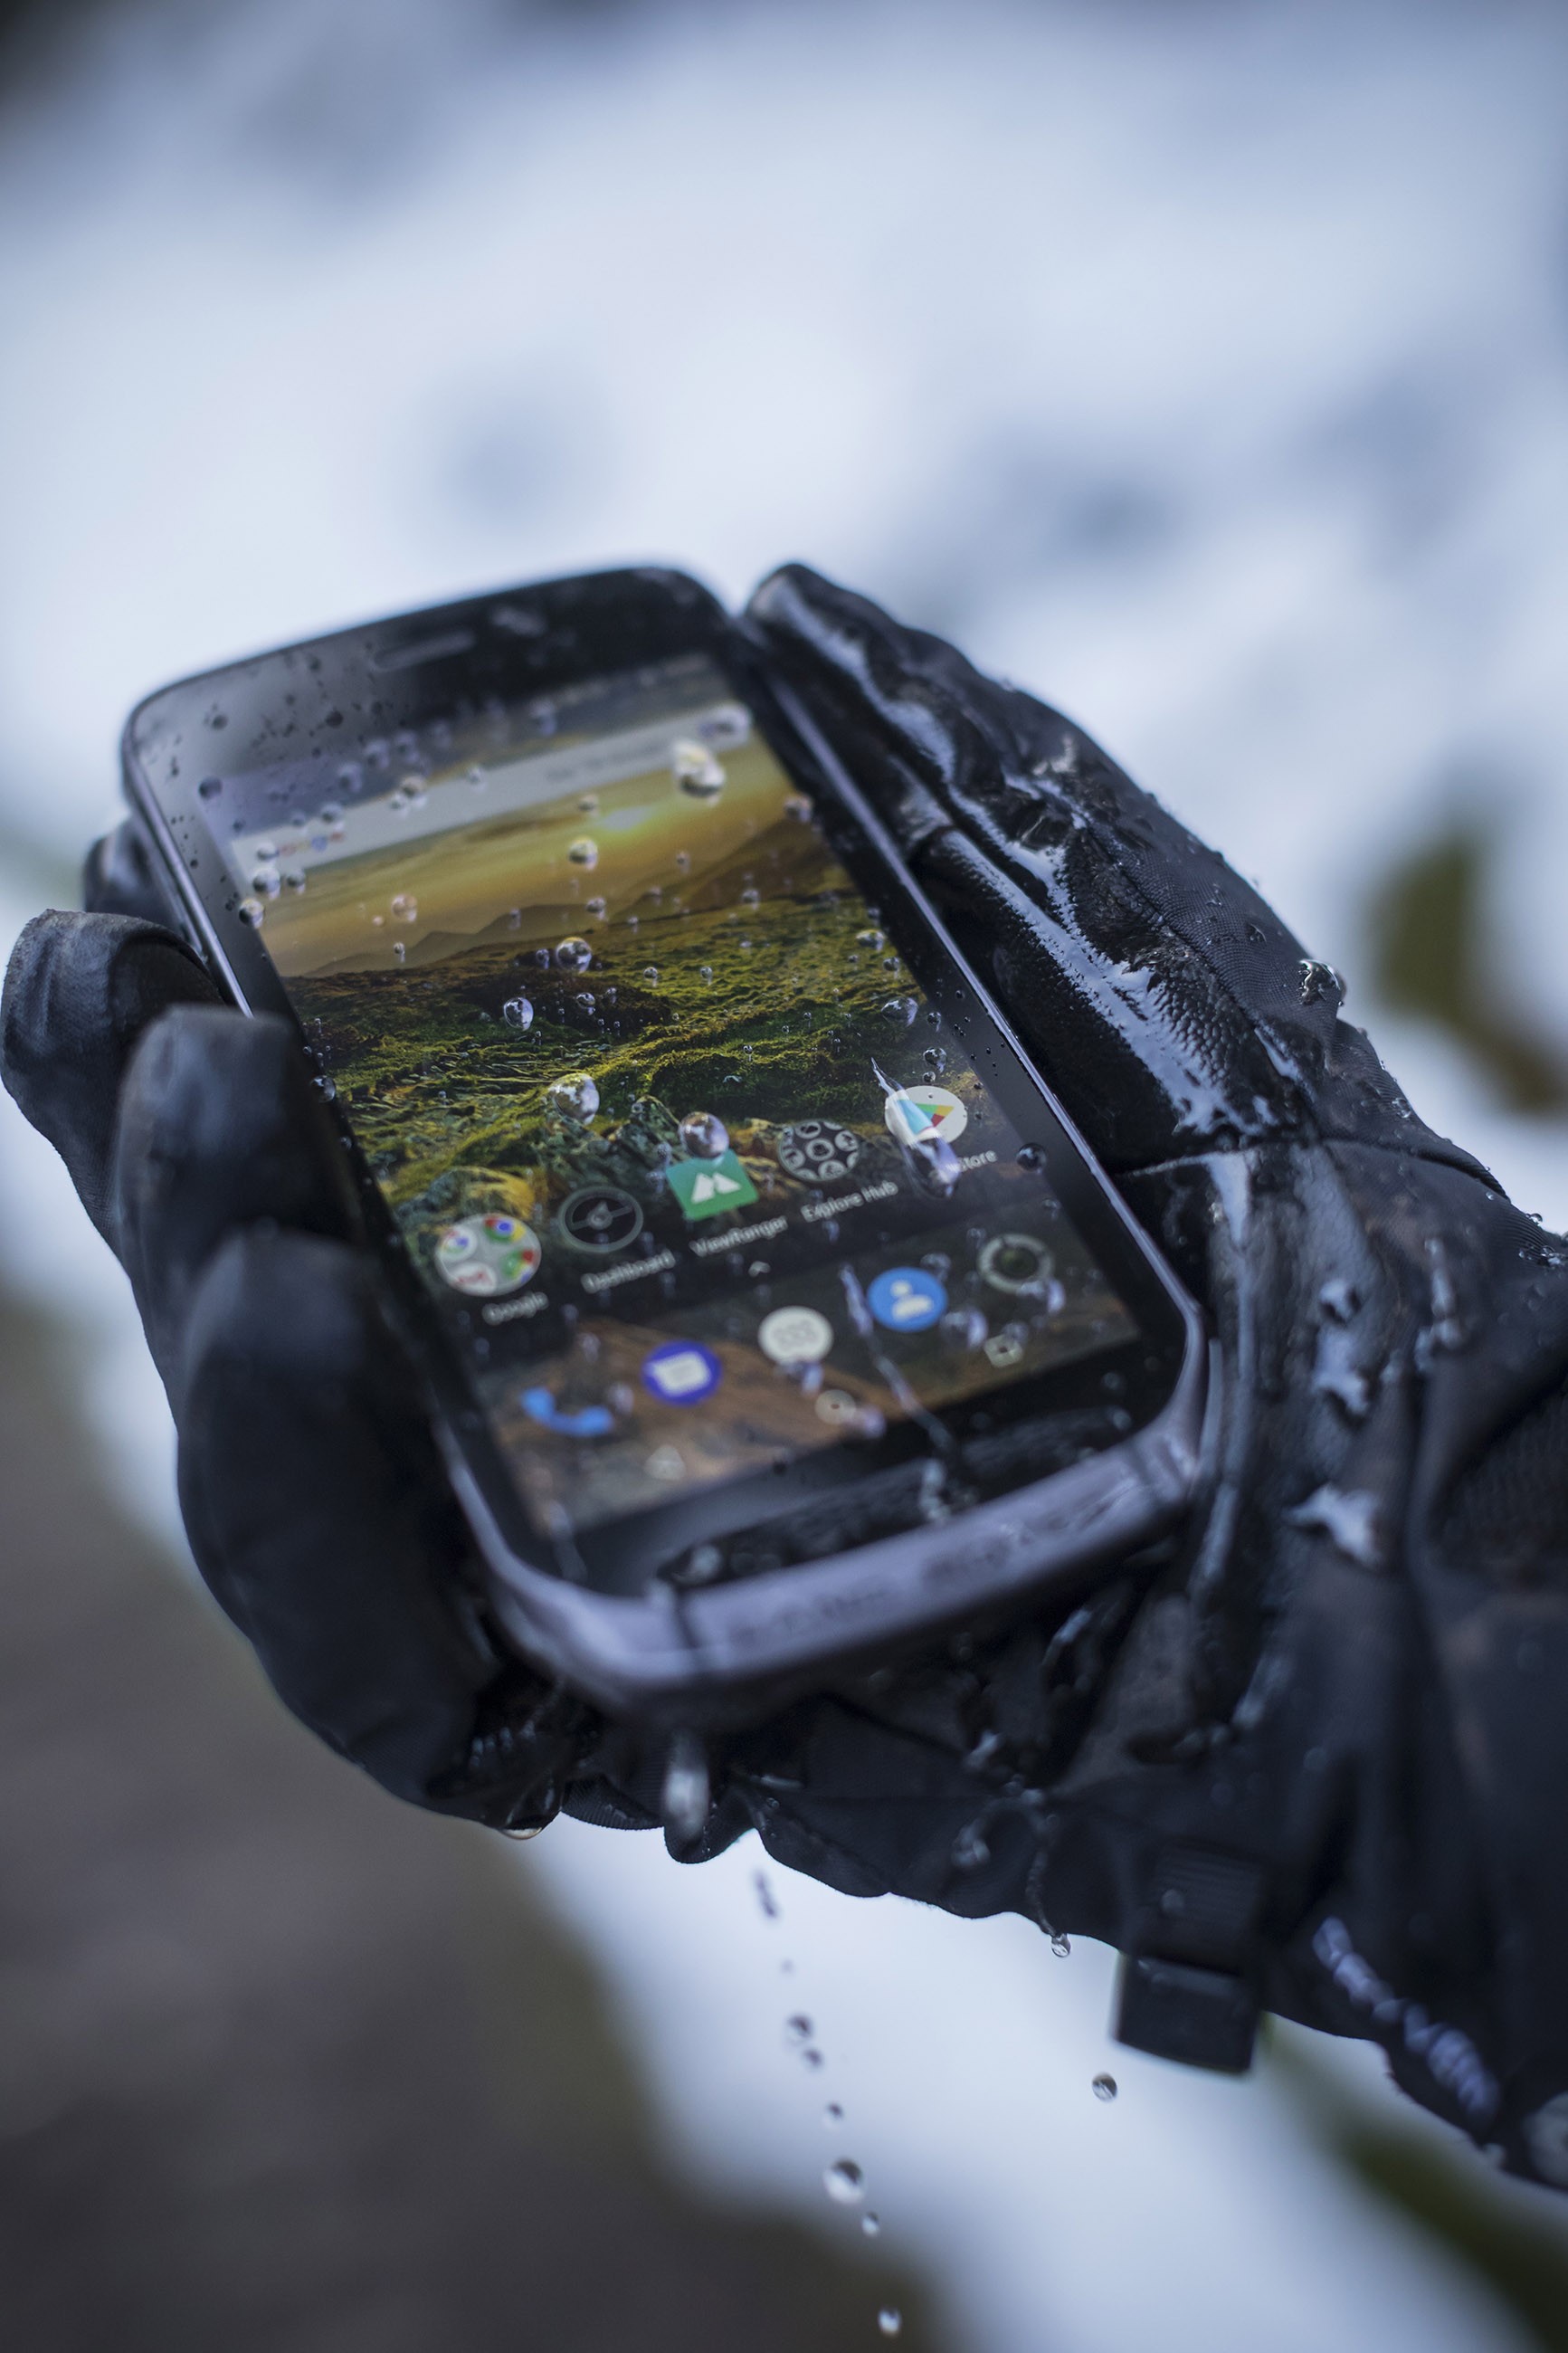 Land Rover Explore Rugged Android Smartphone Coming This